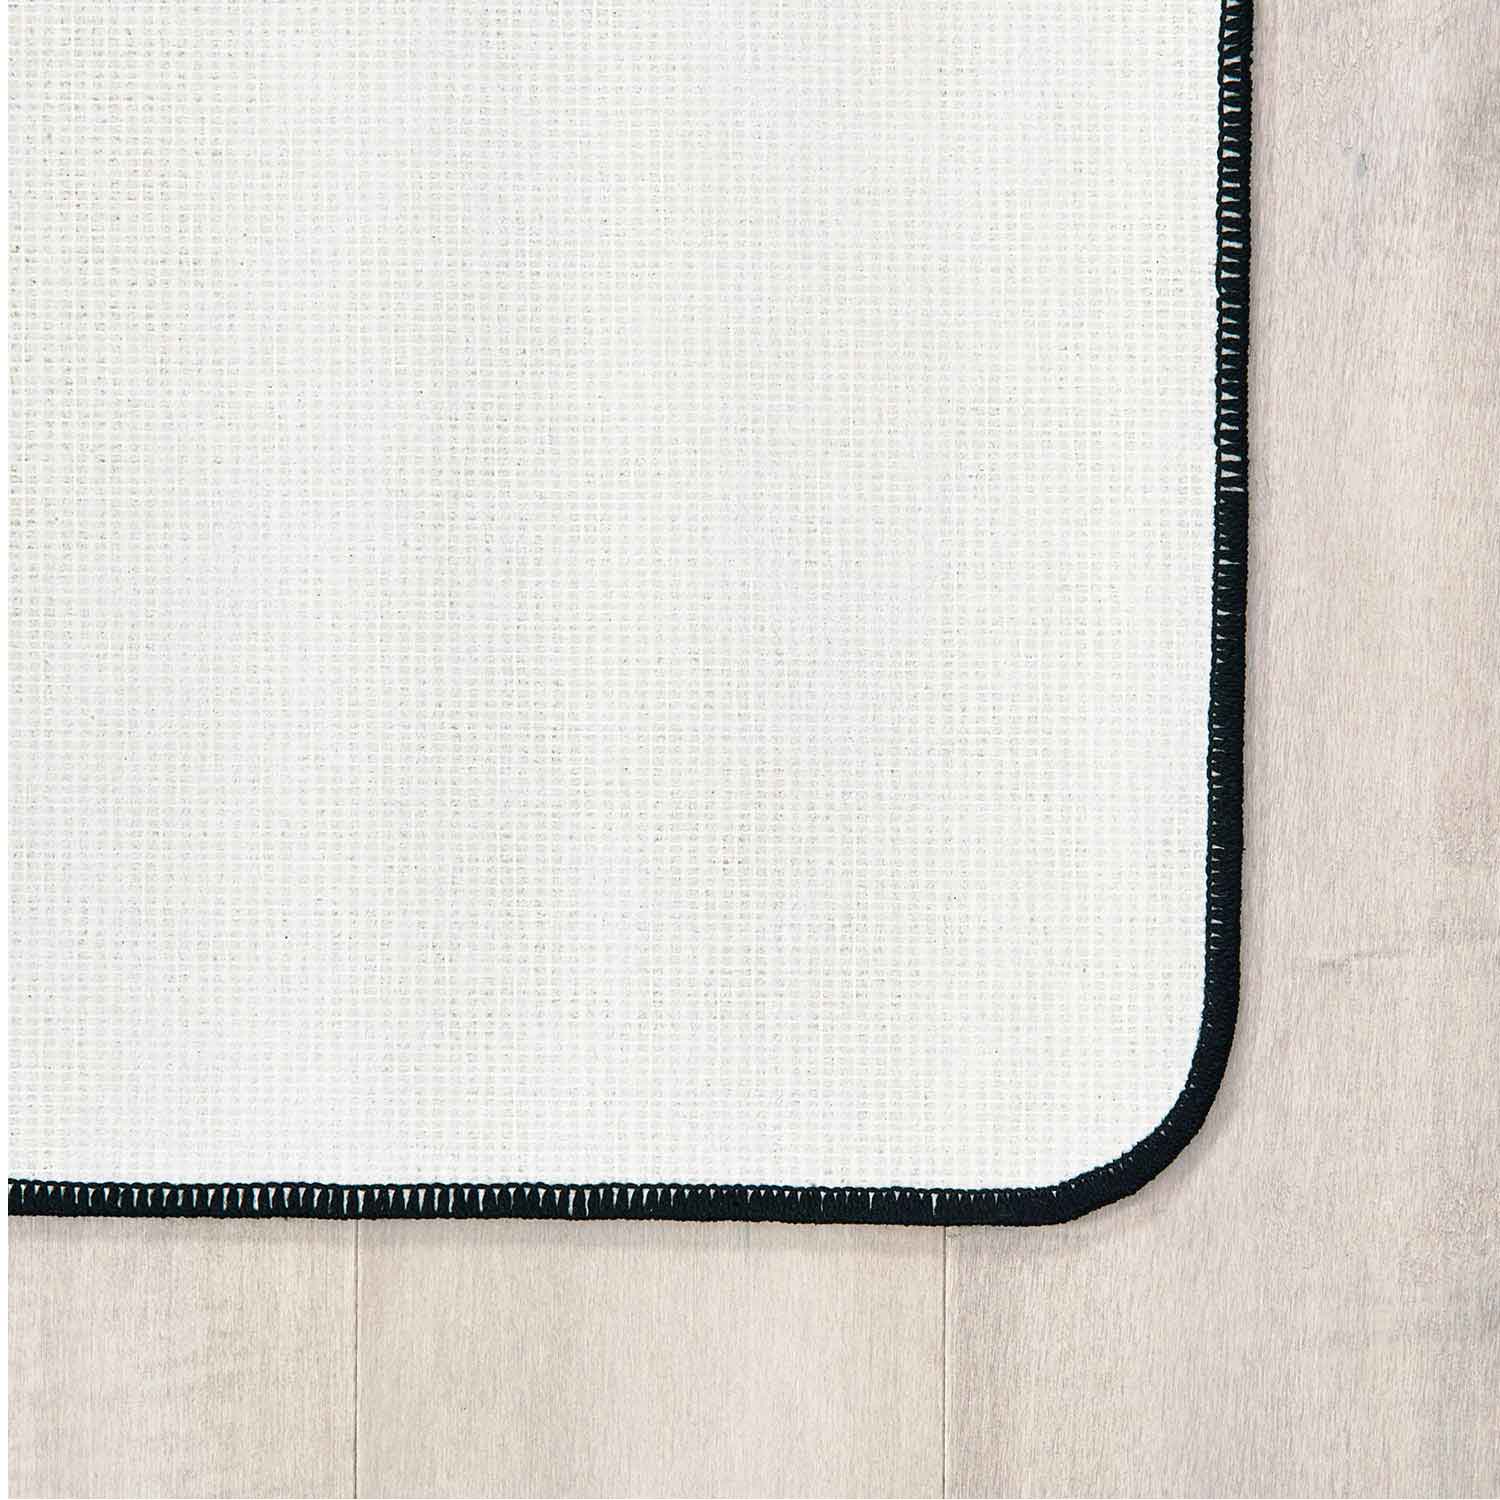 Primary Squares Seating Rug